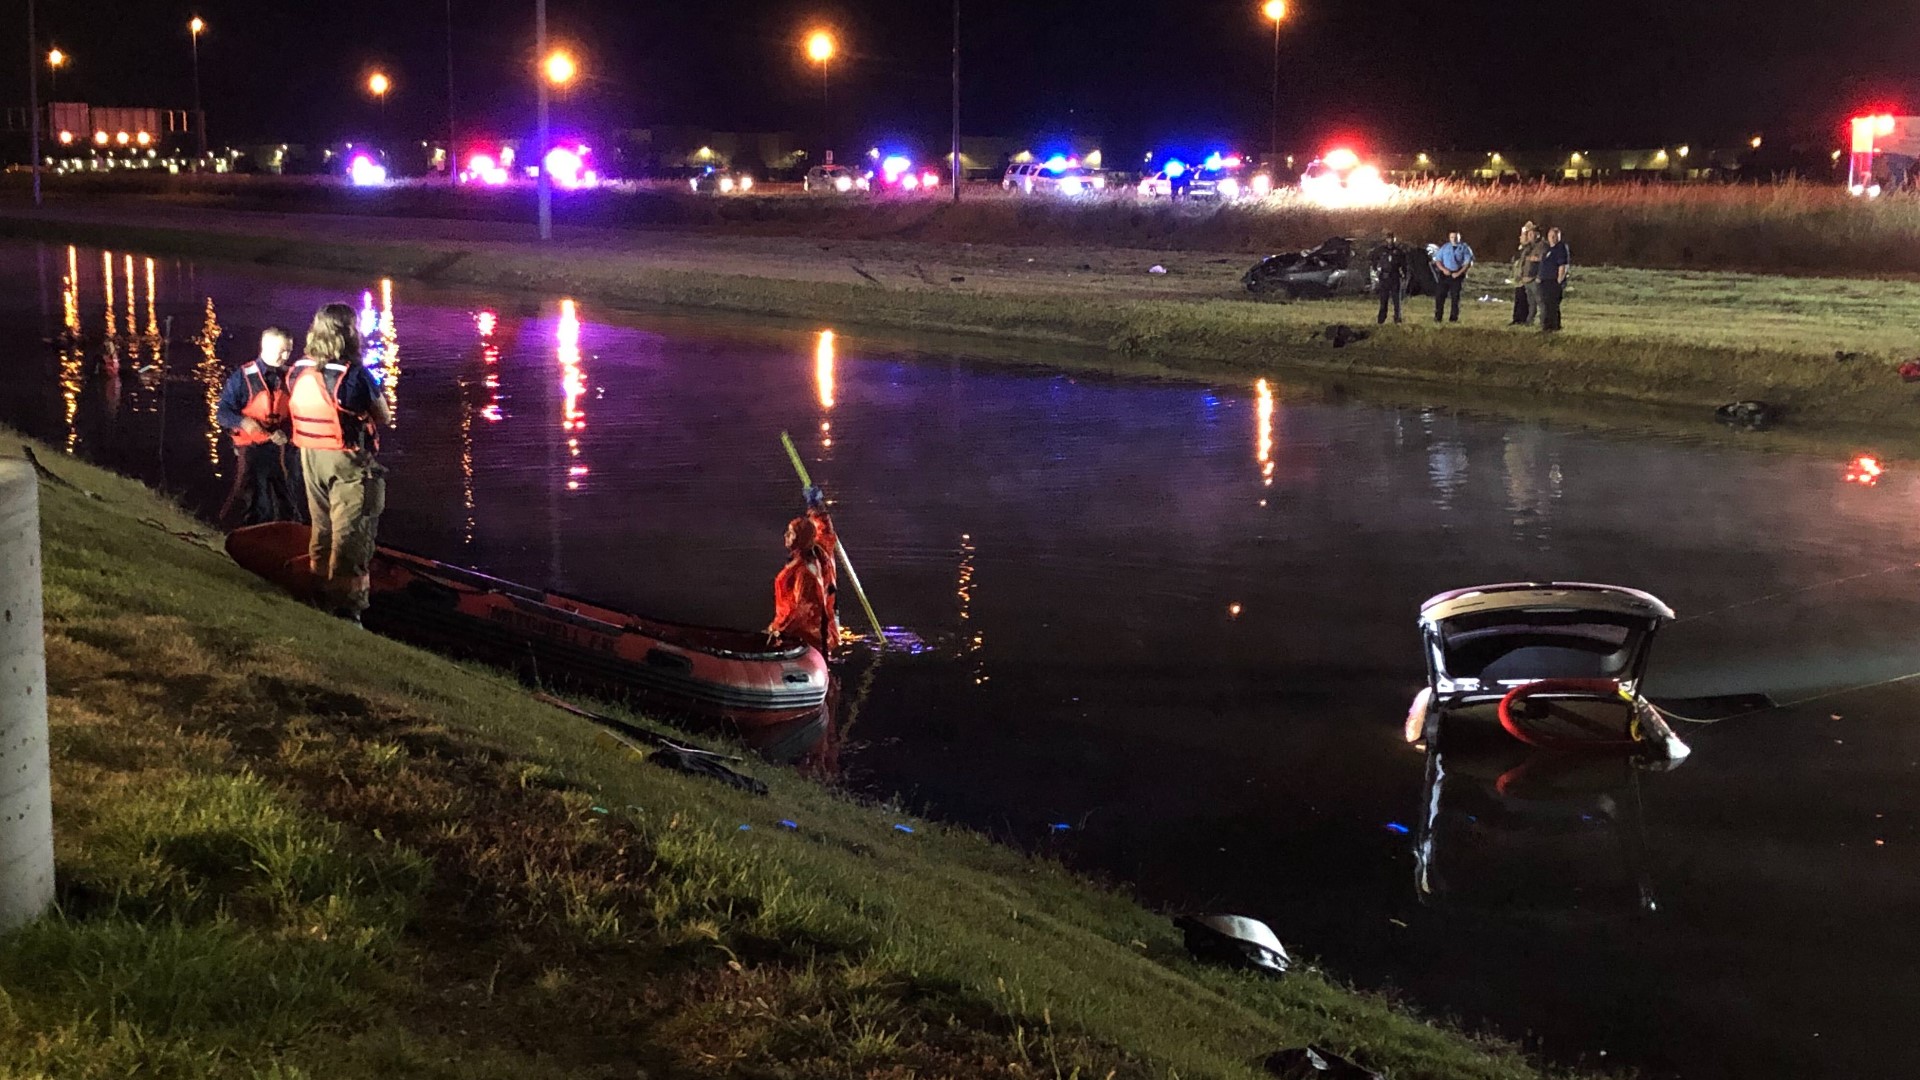 The chase ended with a car crashing into a canal. One person is confirmed drowned.